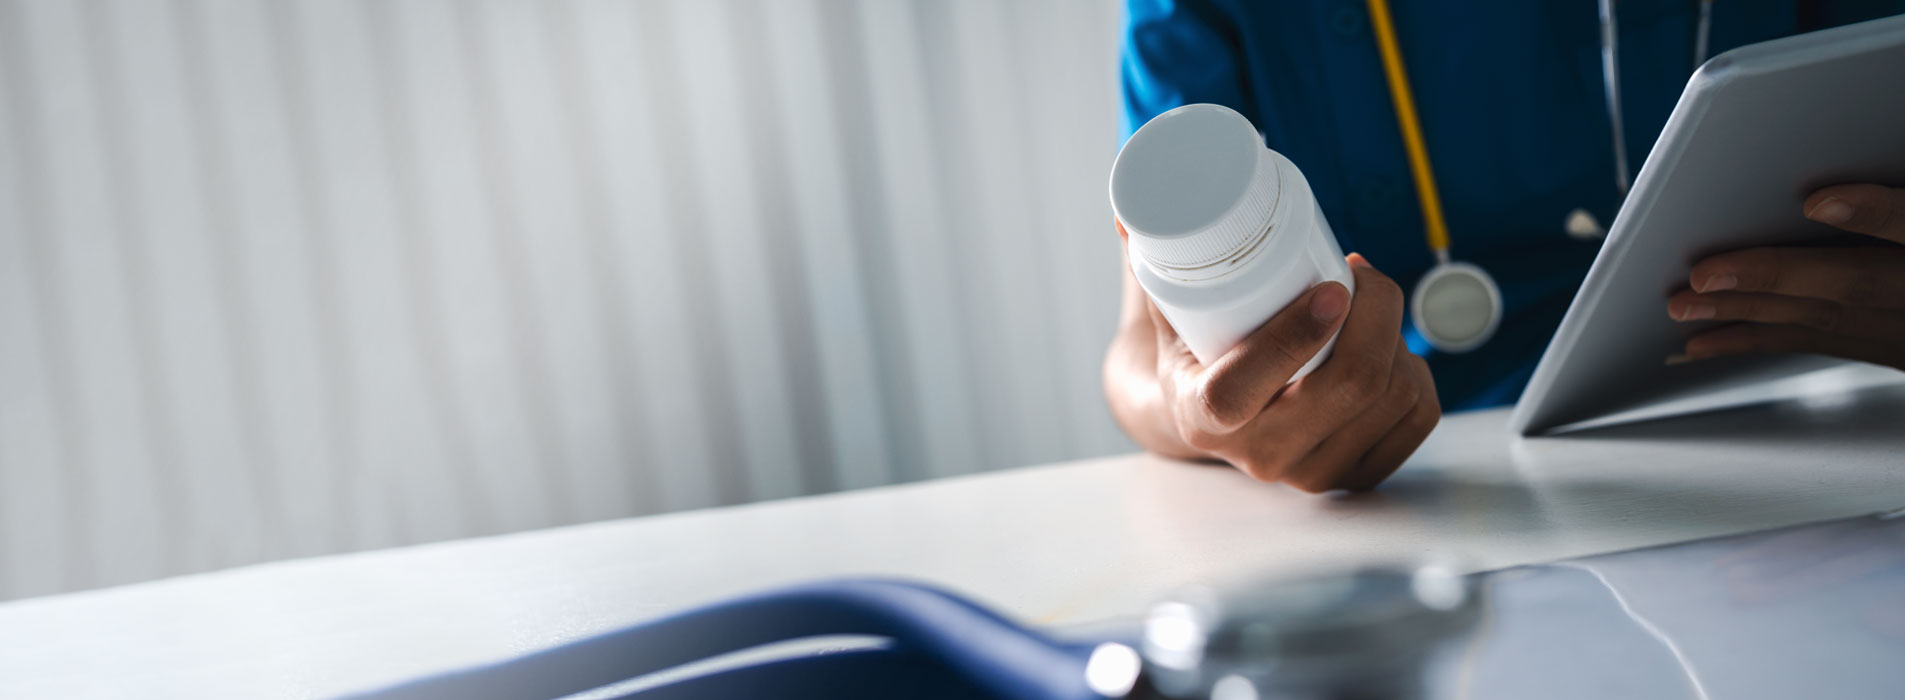 LTPAC nurse holding a medicine bottle and digital tablet with blurred stethoscope on table